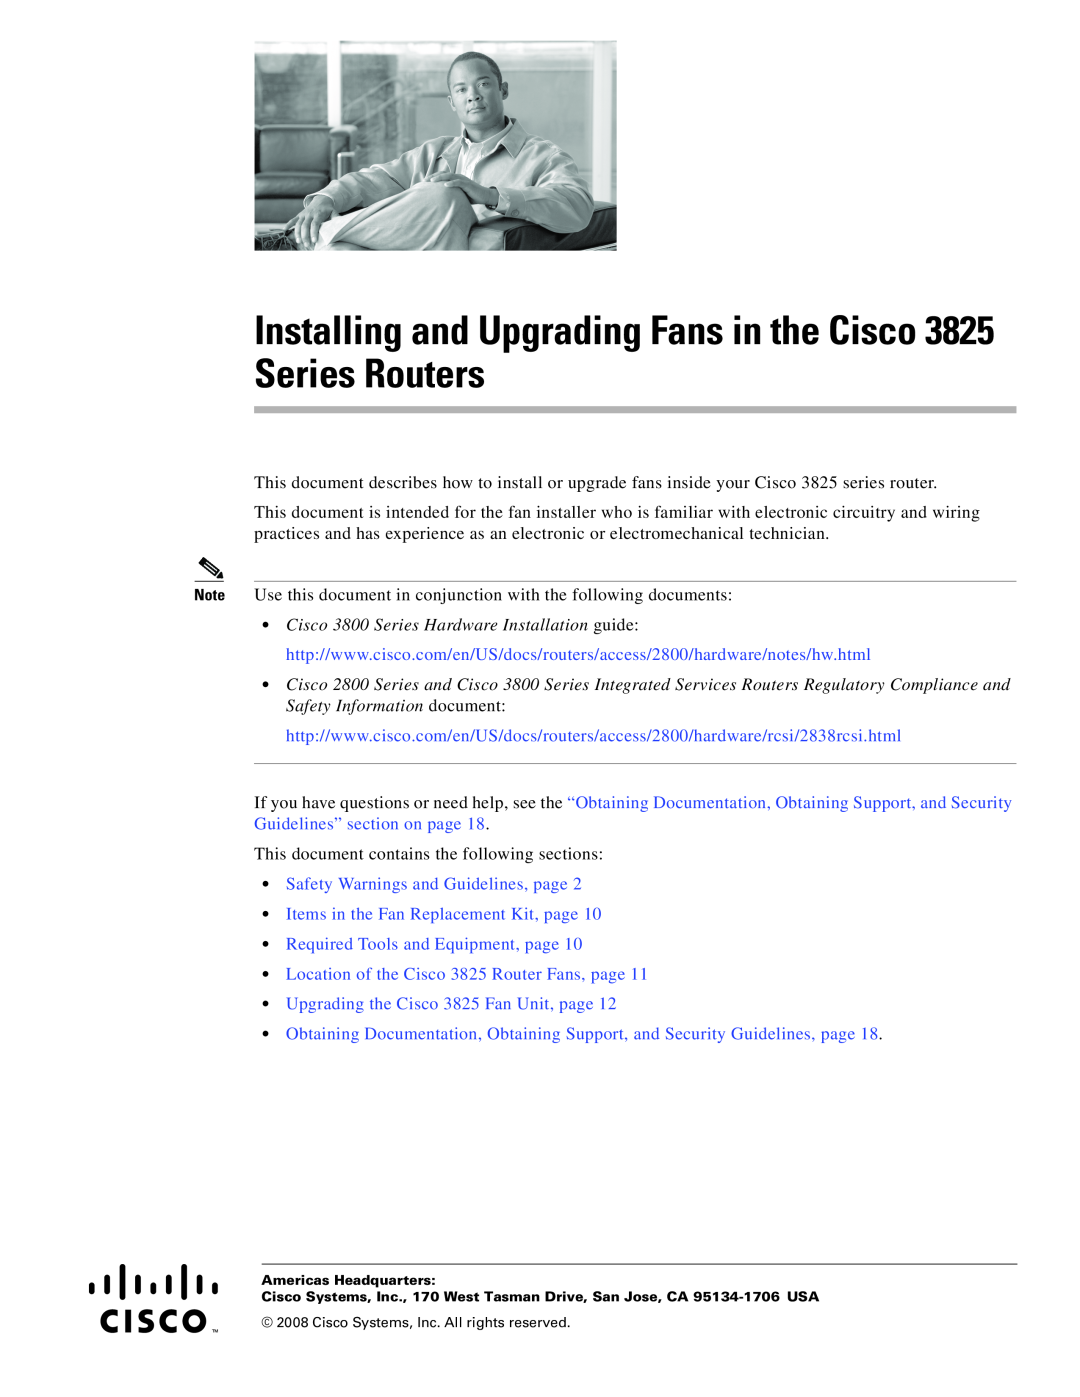 Cisco Systems 3825 Series manual Safety Warnings and Guidelines, page, Items in the Fan Replacement Kit, page 